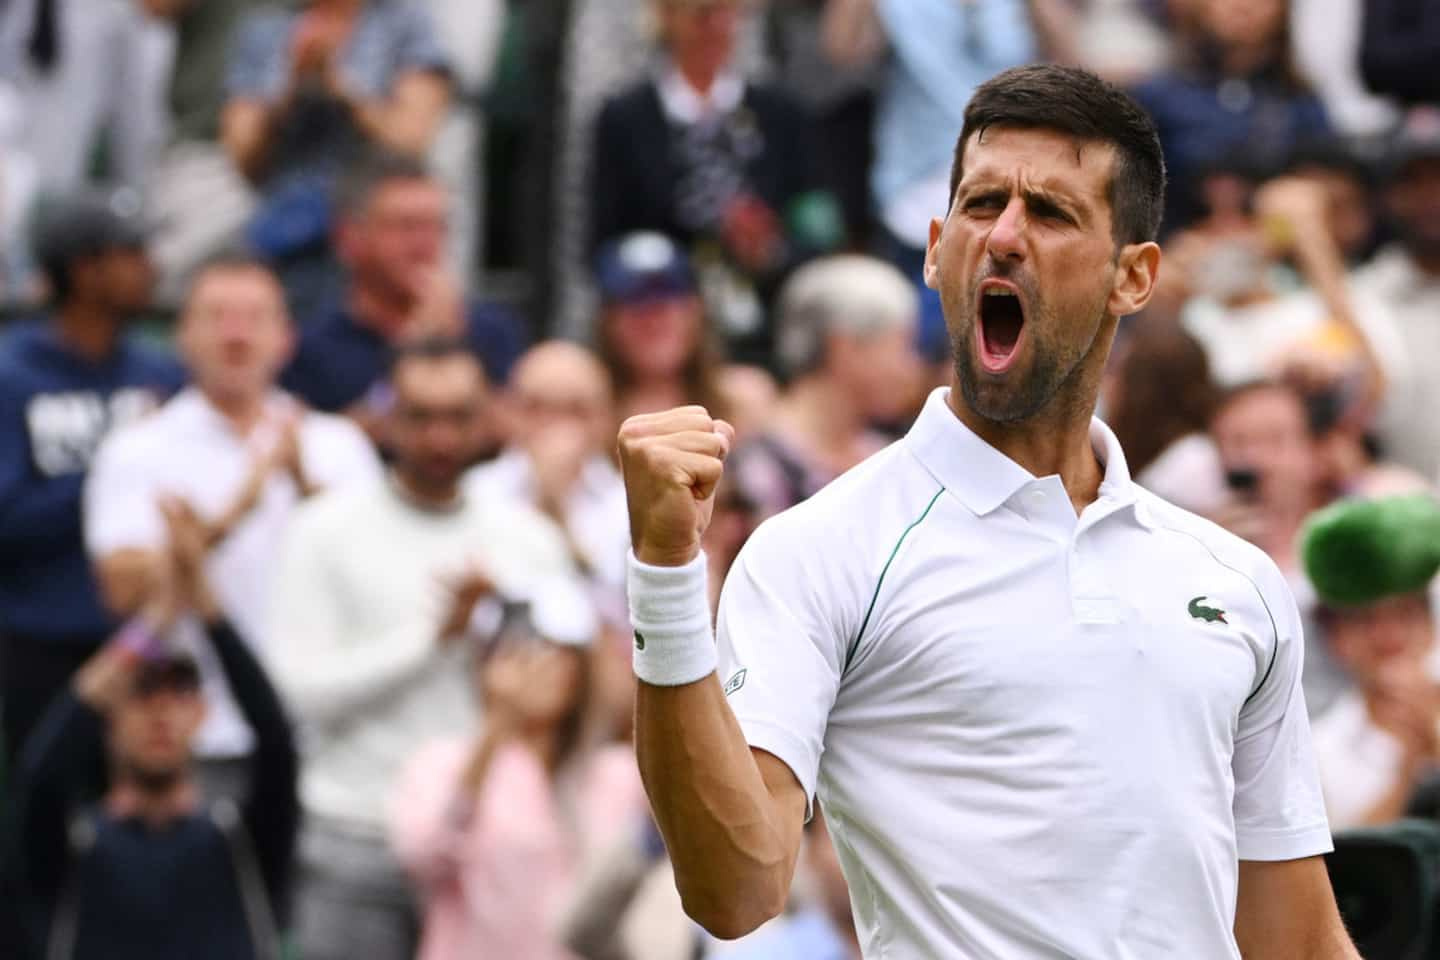 Novak Djokovic will draw on his resources and advance to the semi-finals at Wimbledon